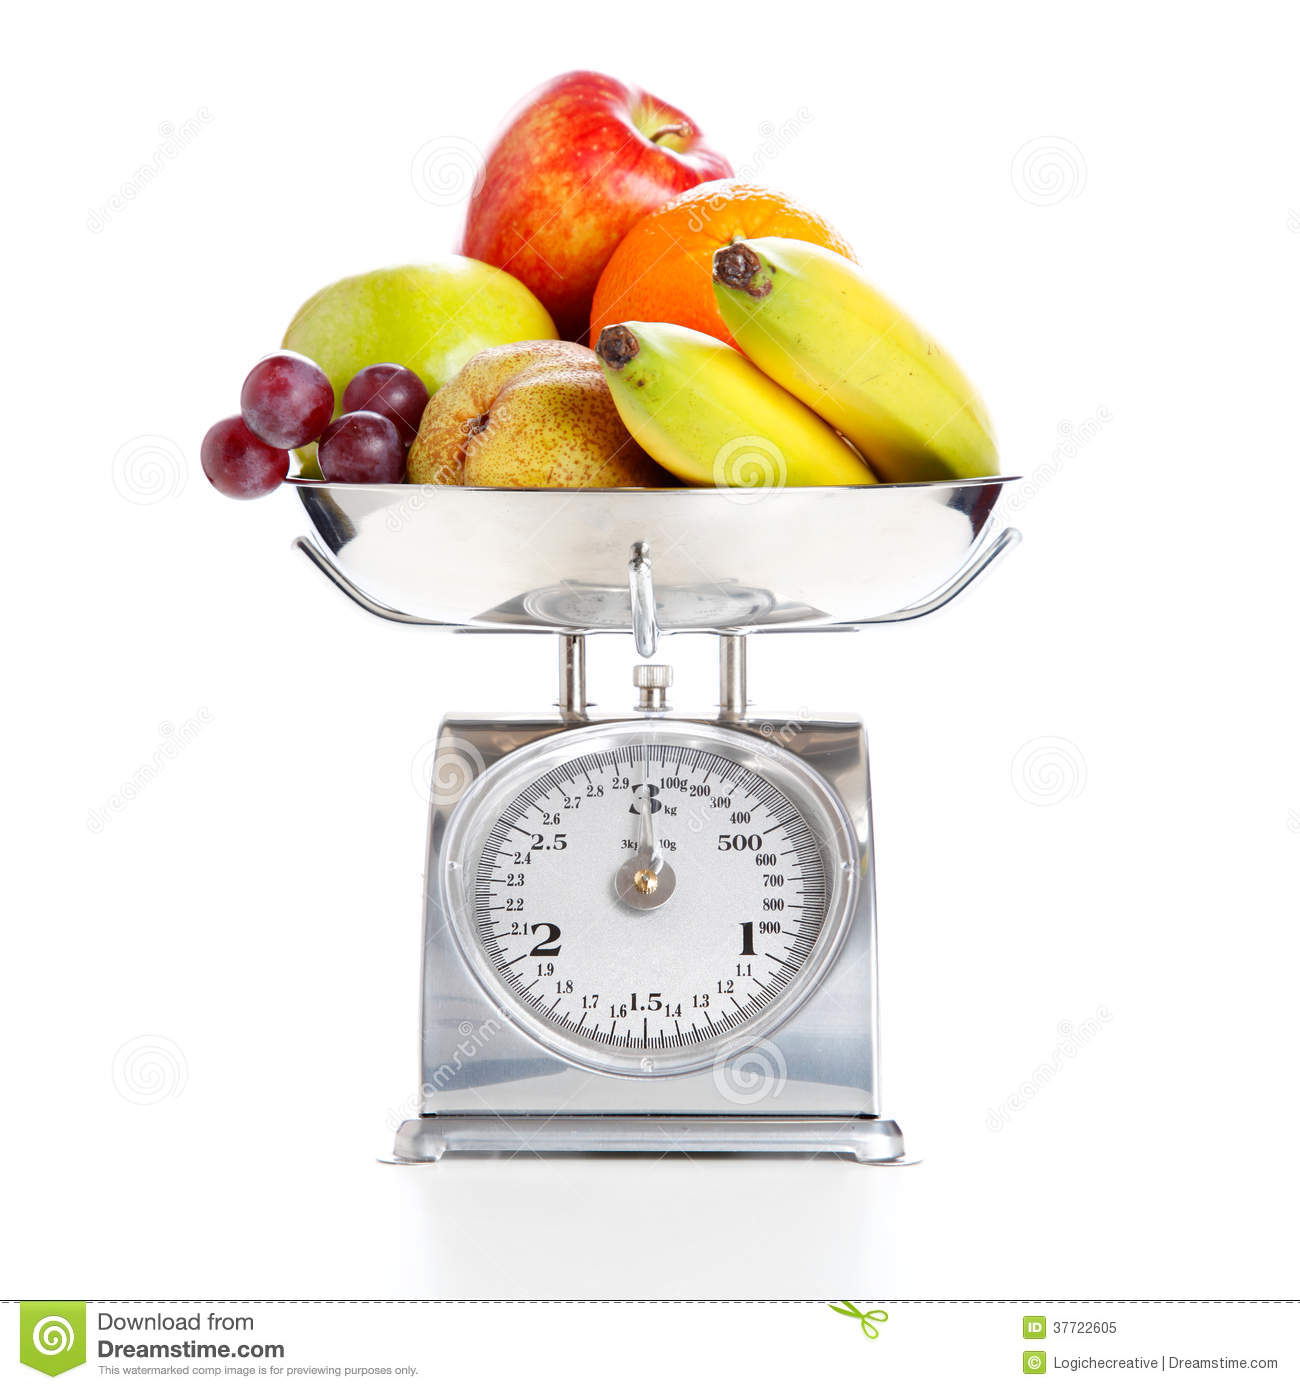 Similar Stock Images Of   Vegetables And Fruits On A Weighing Scale